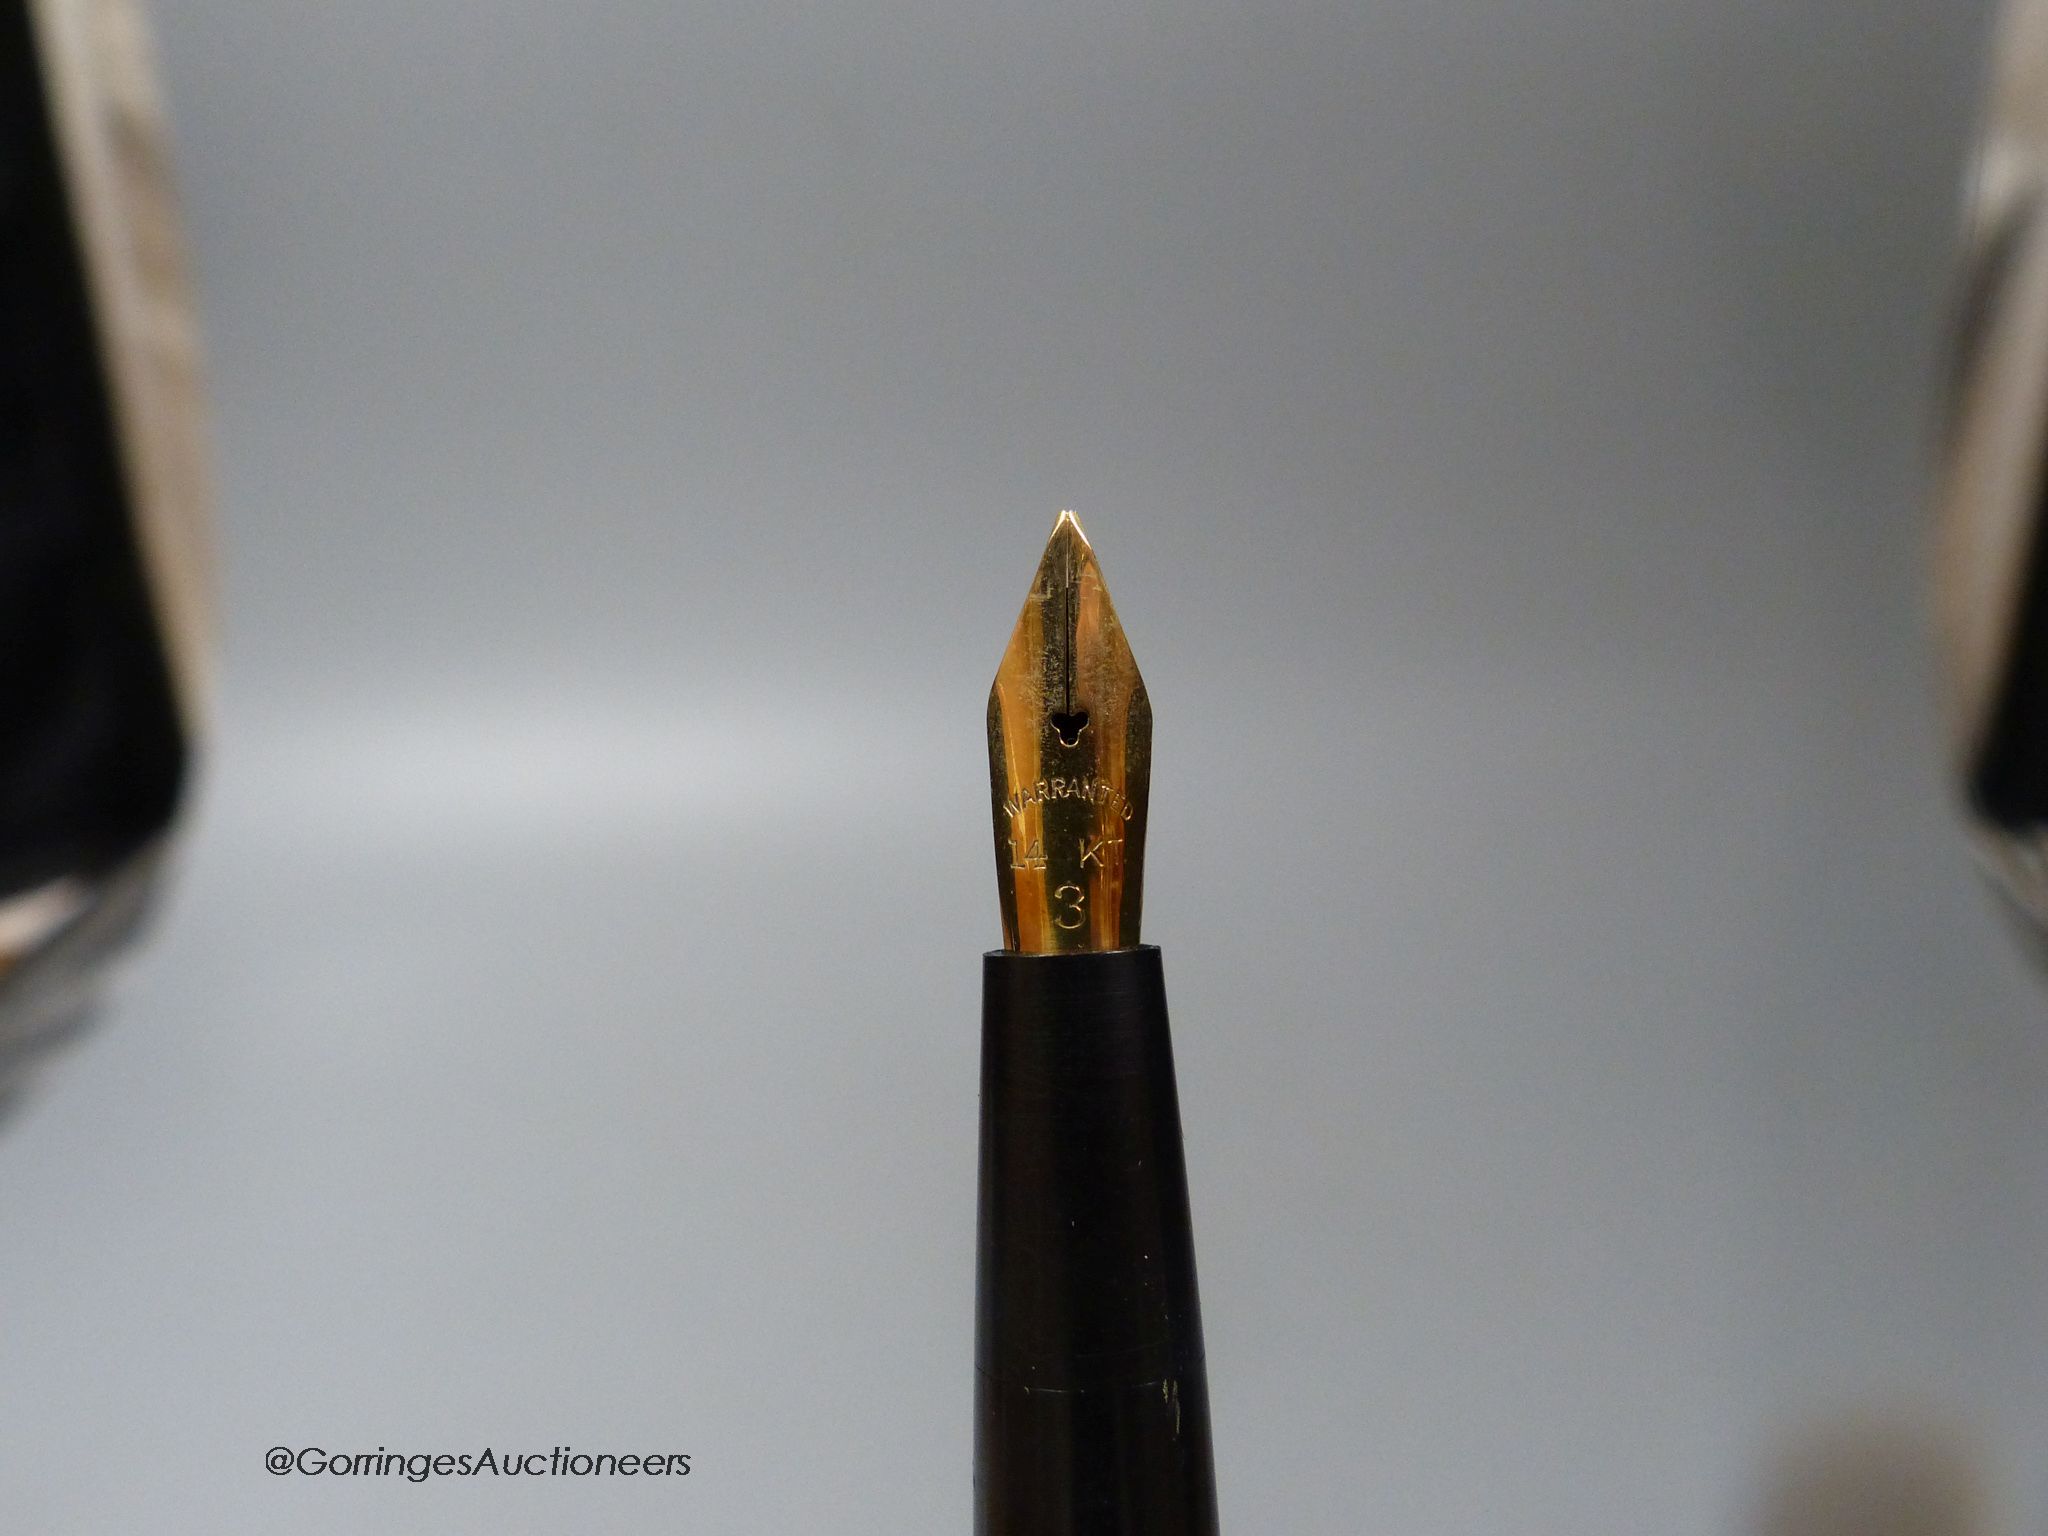 A 1920's gold plated eye-dropper fountain pen